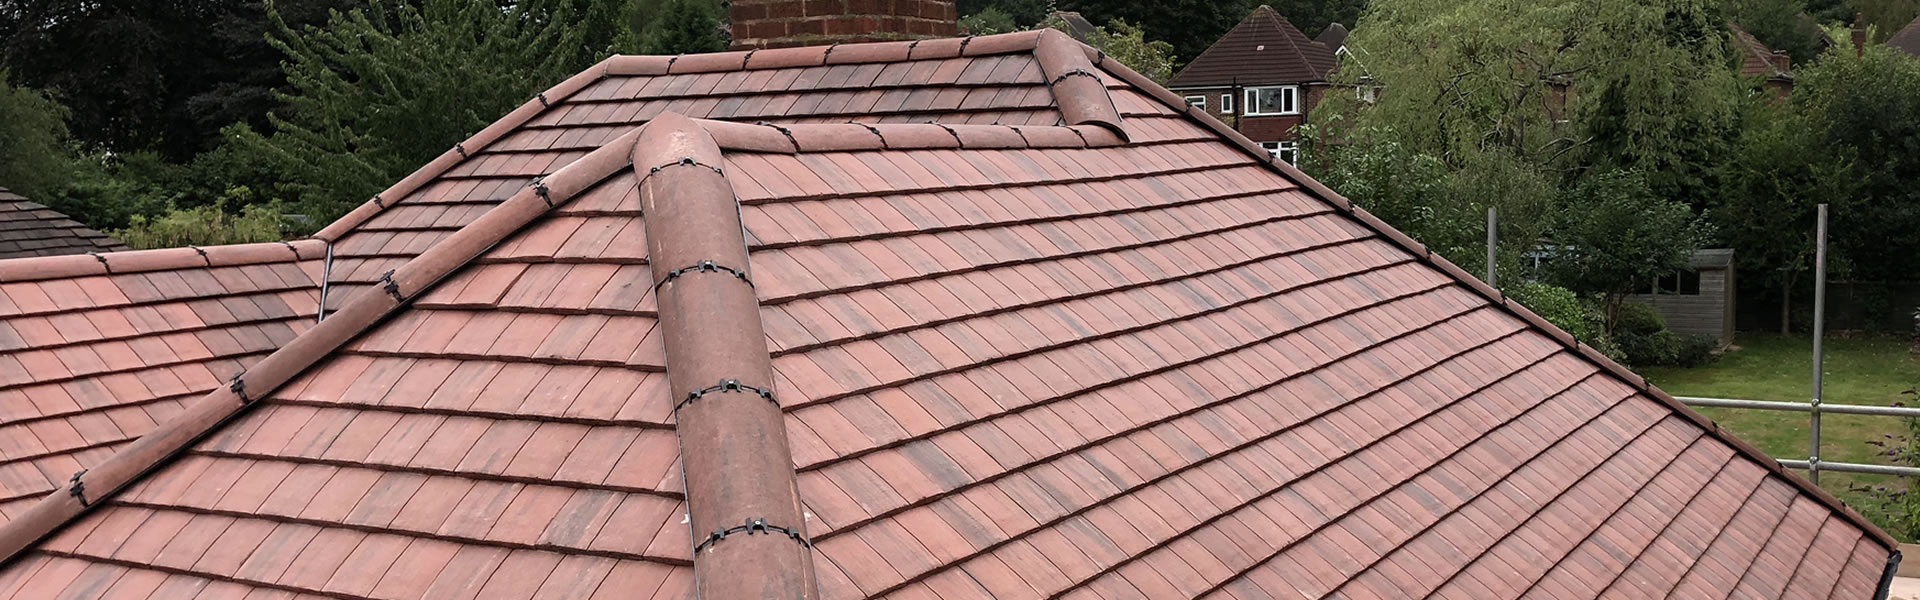 Roofers near Walsall, Wednesbury, West Bromwich, Great Barr, Sutton Coldfield, Cannock &amp; surrounding areas